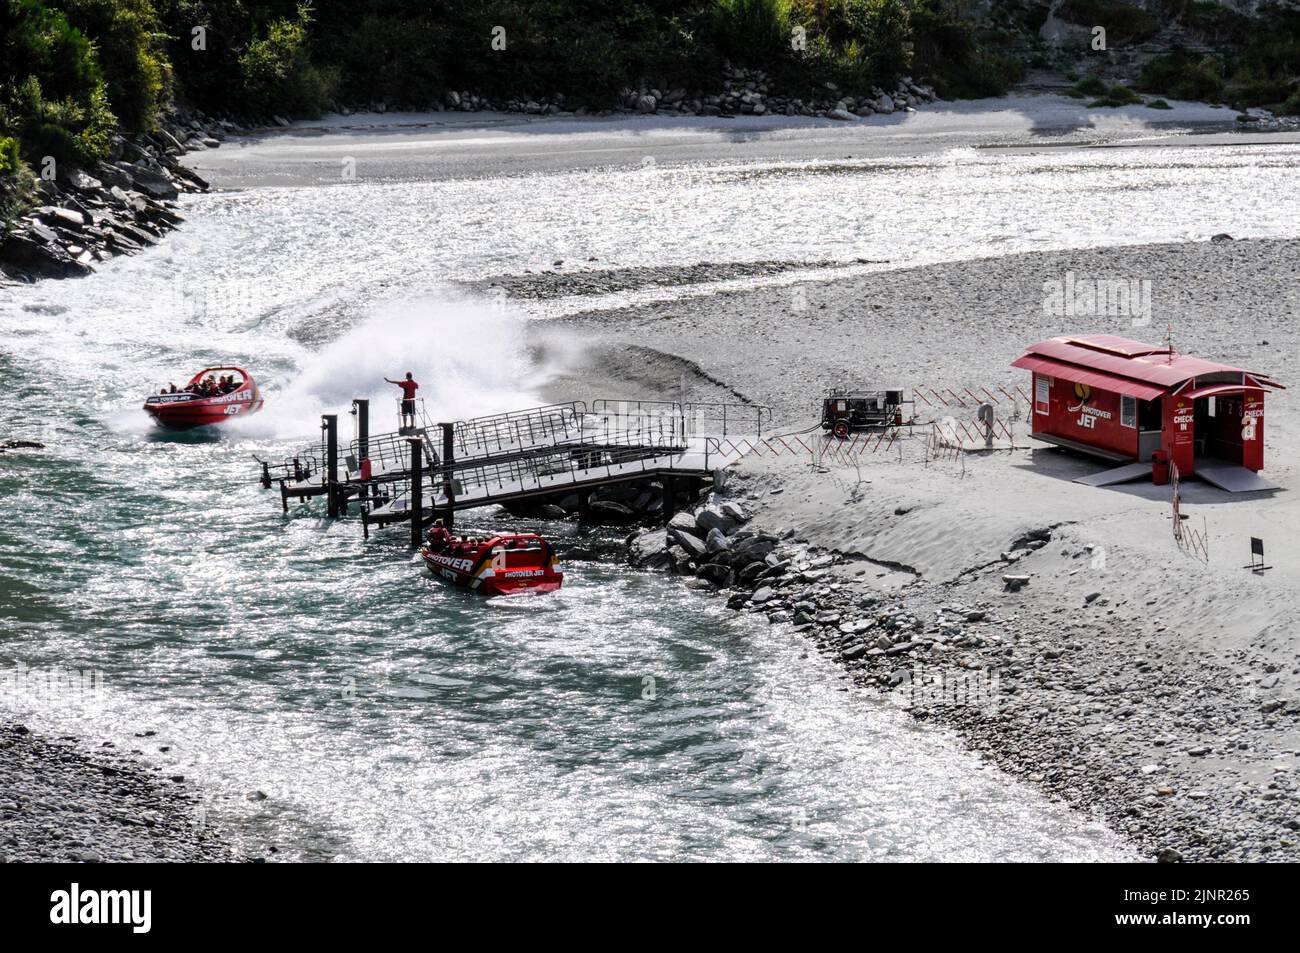 View of the high speed jet boat on the river Shootover close to the 'check in ' cabin on the shore. Queenstown on South Island, New Zealand Stock Photo